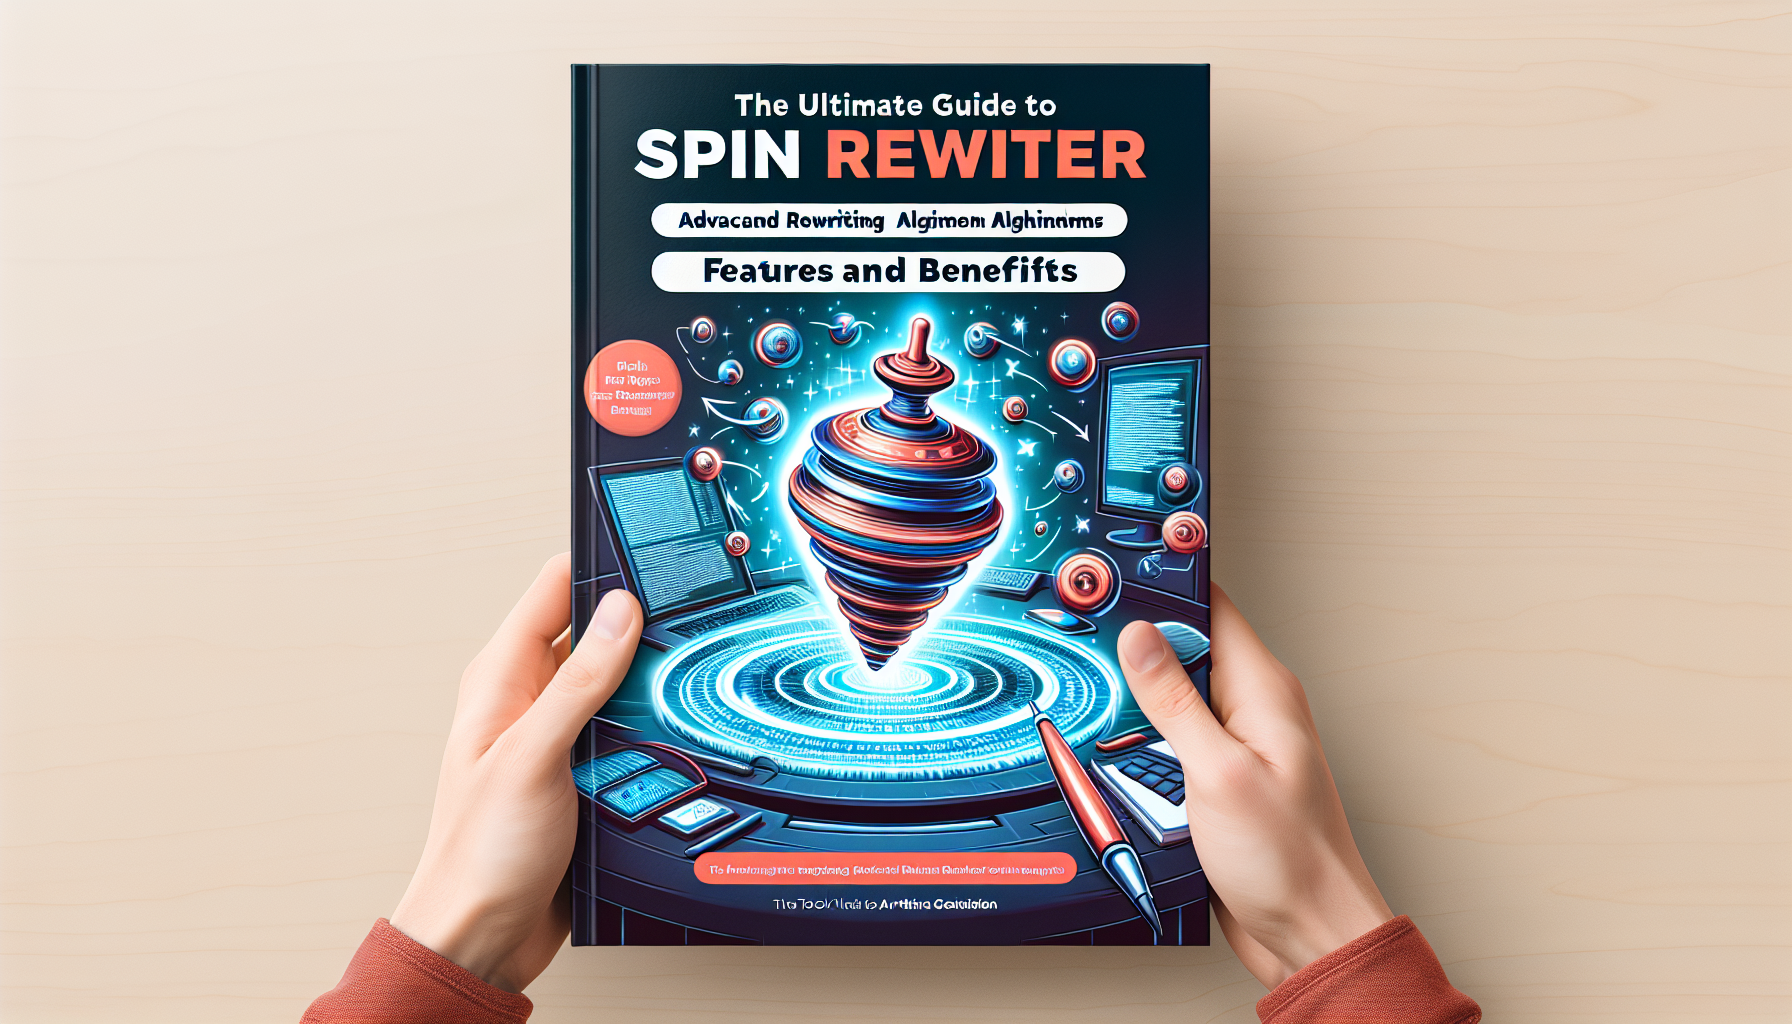 The Ultimate Guide to Spin Rewriter Features and Benefits